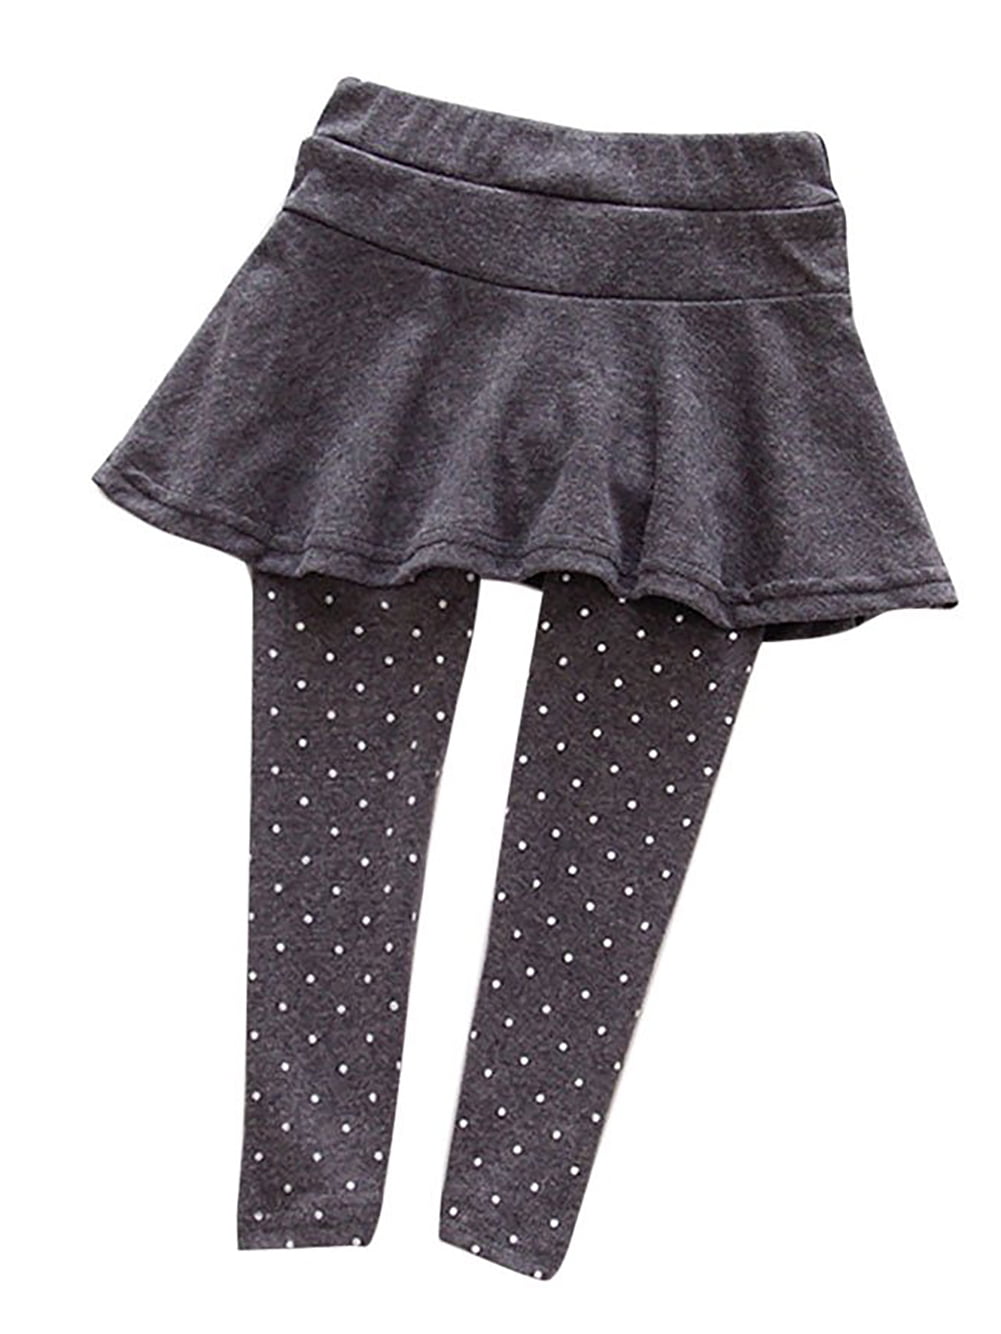 Girls Black With Glitter Fancy Dance/party Tights Age 3-4 Years